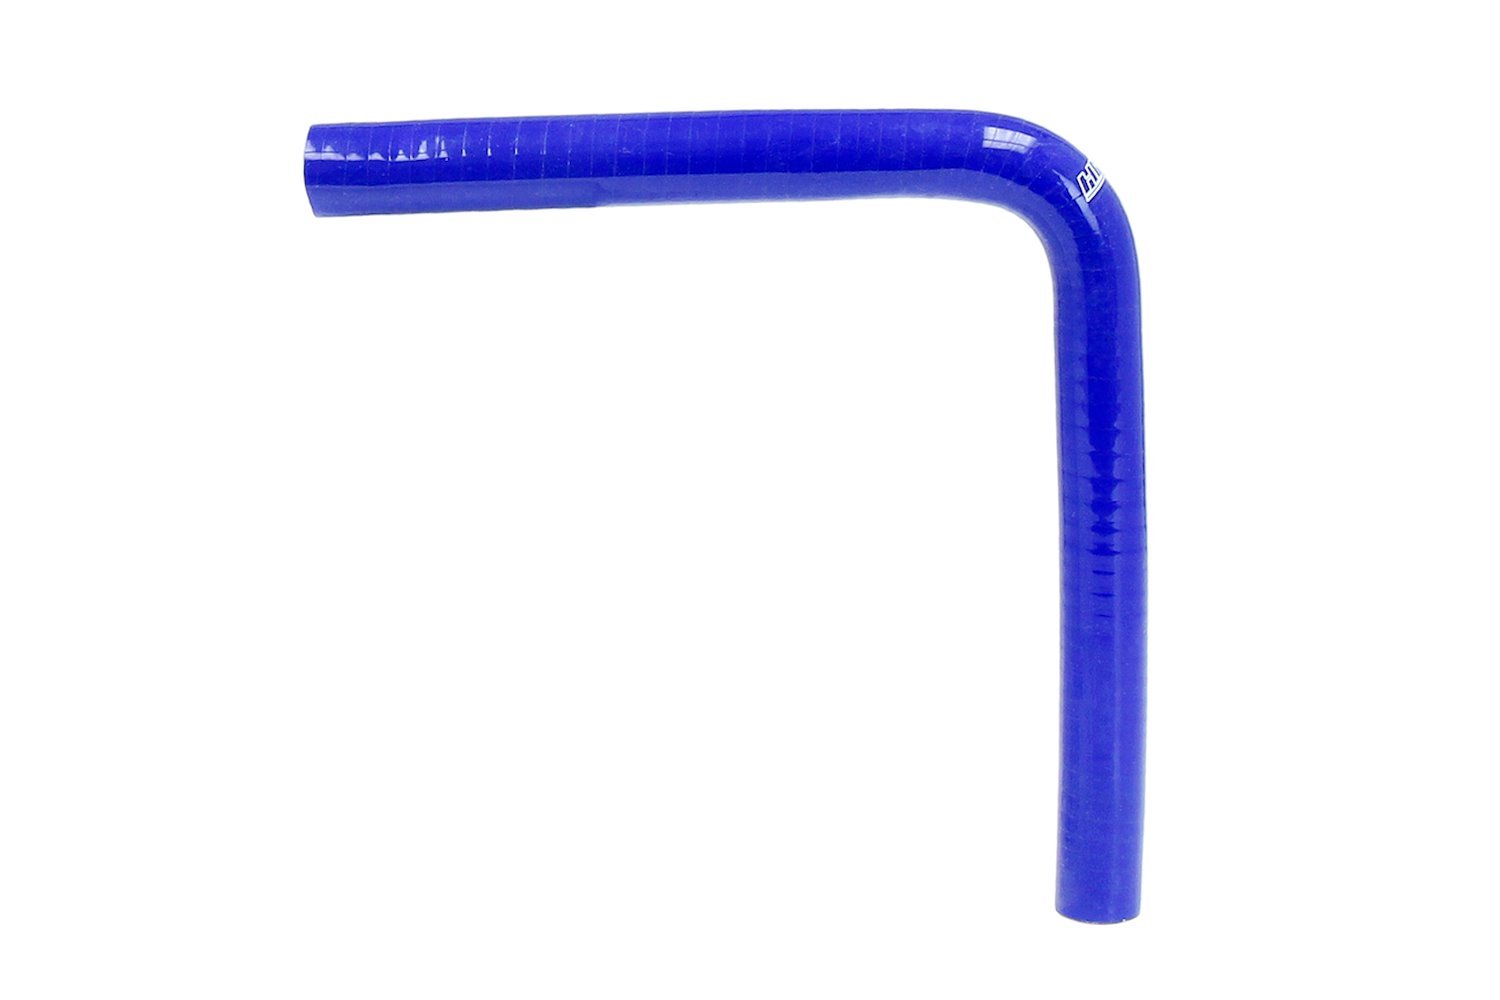 HTSEC90-050-L10-BLUE Silicone 90-Degree Elbow Hose, High-Temp 4-Ply Reinforced, 1/2 in. ID, 10 in. Leg, Blue